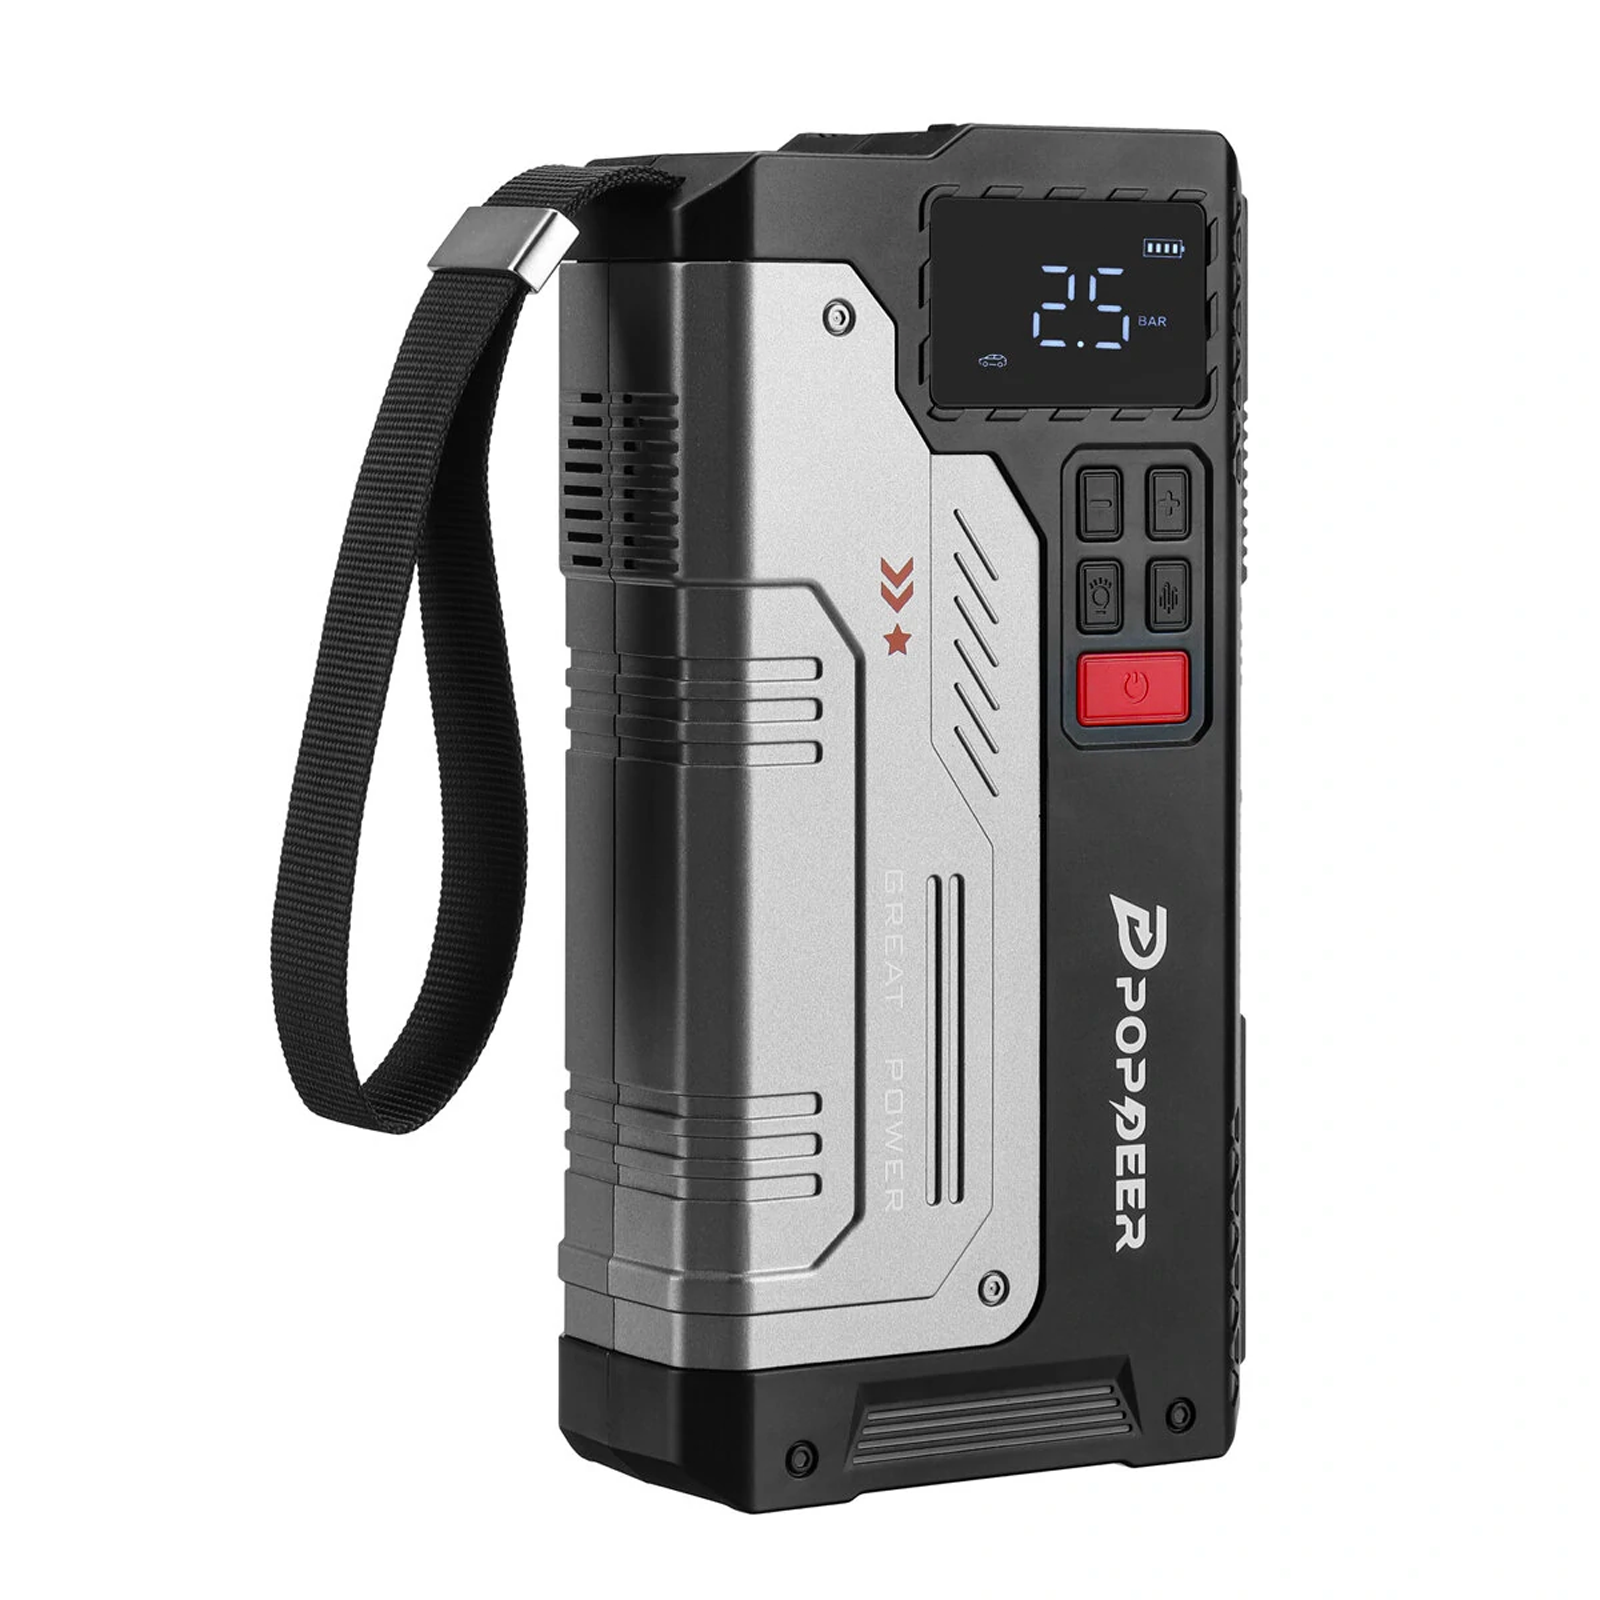 Popdeer PD-JA1 is a starter power bank and compressor in one for only  €62,65! Max. current up to 2500 A and exclusive coupon